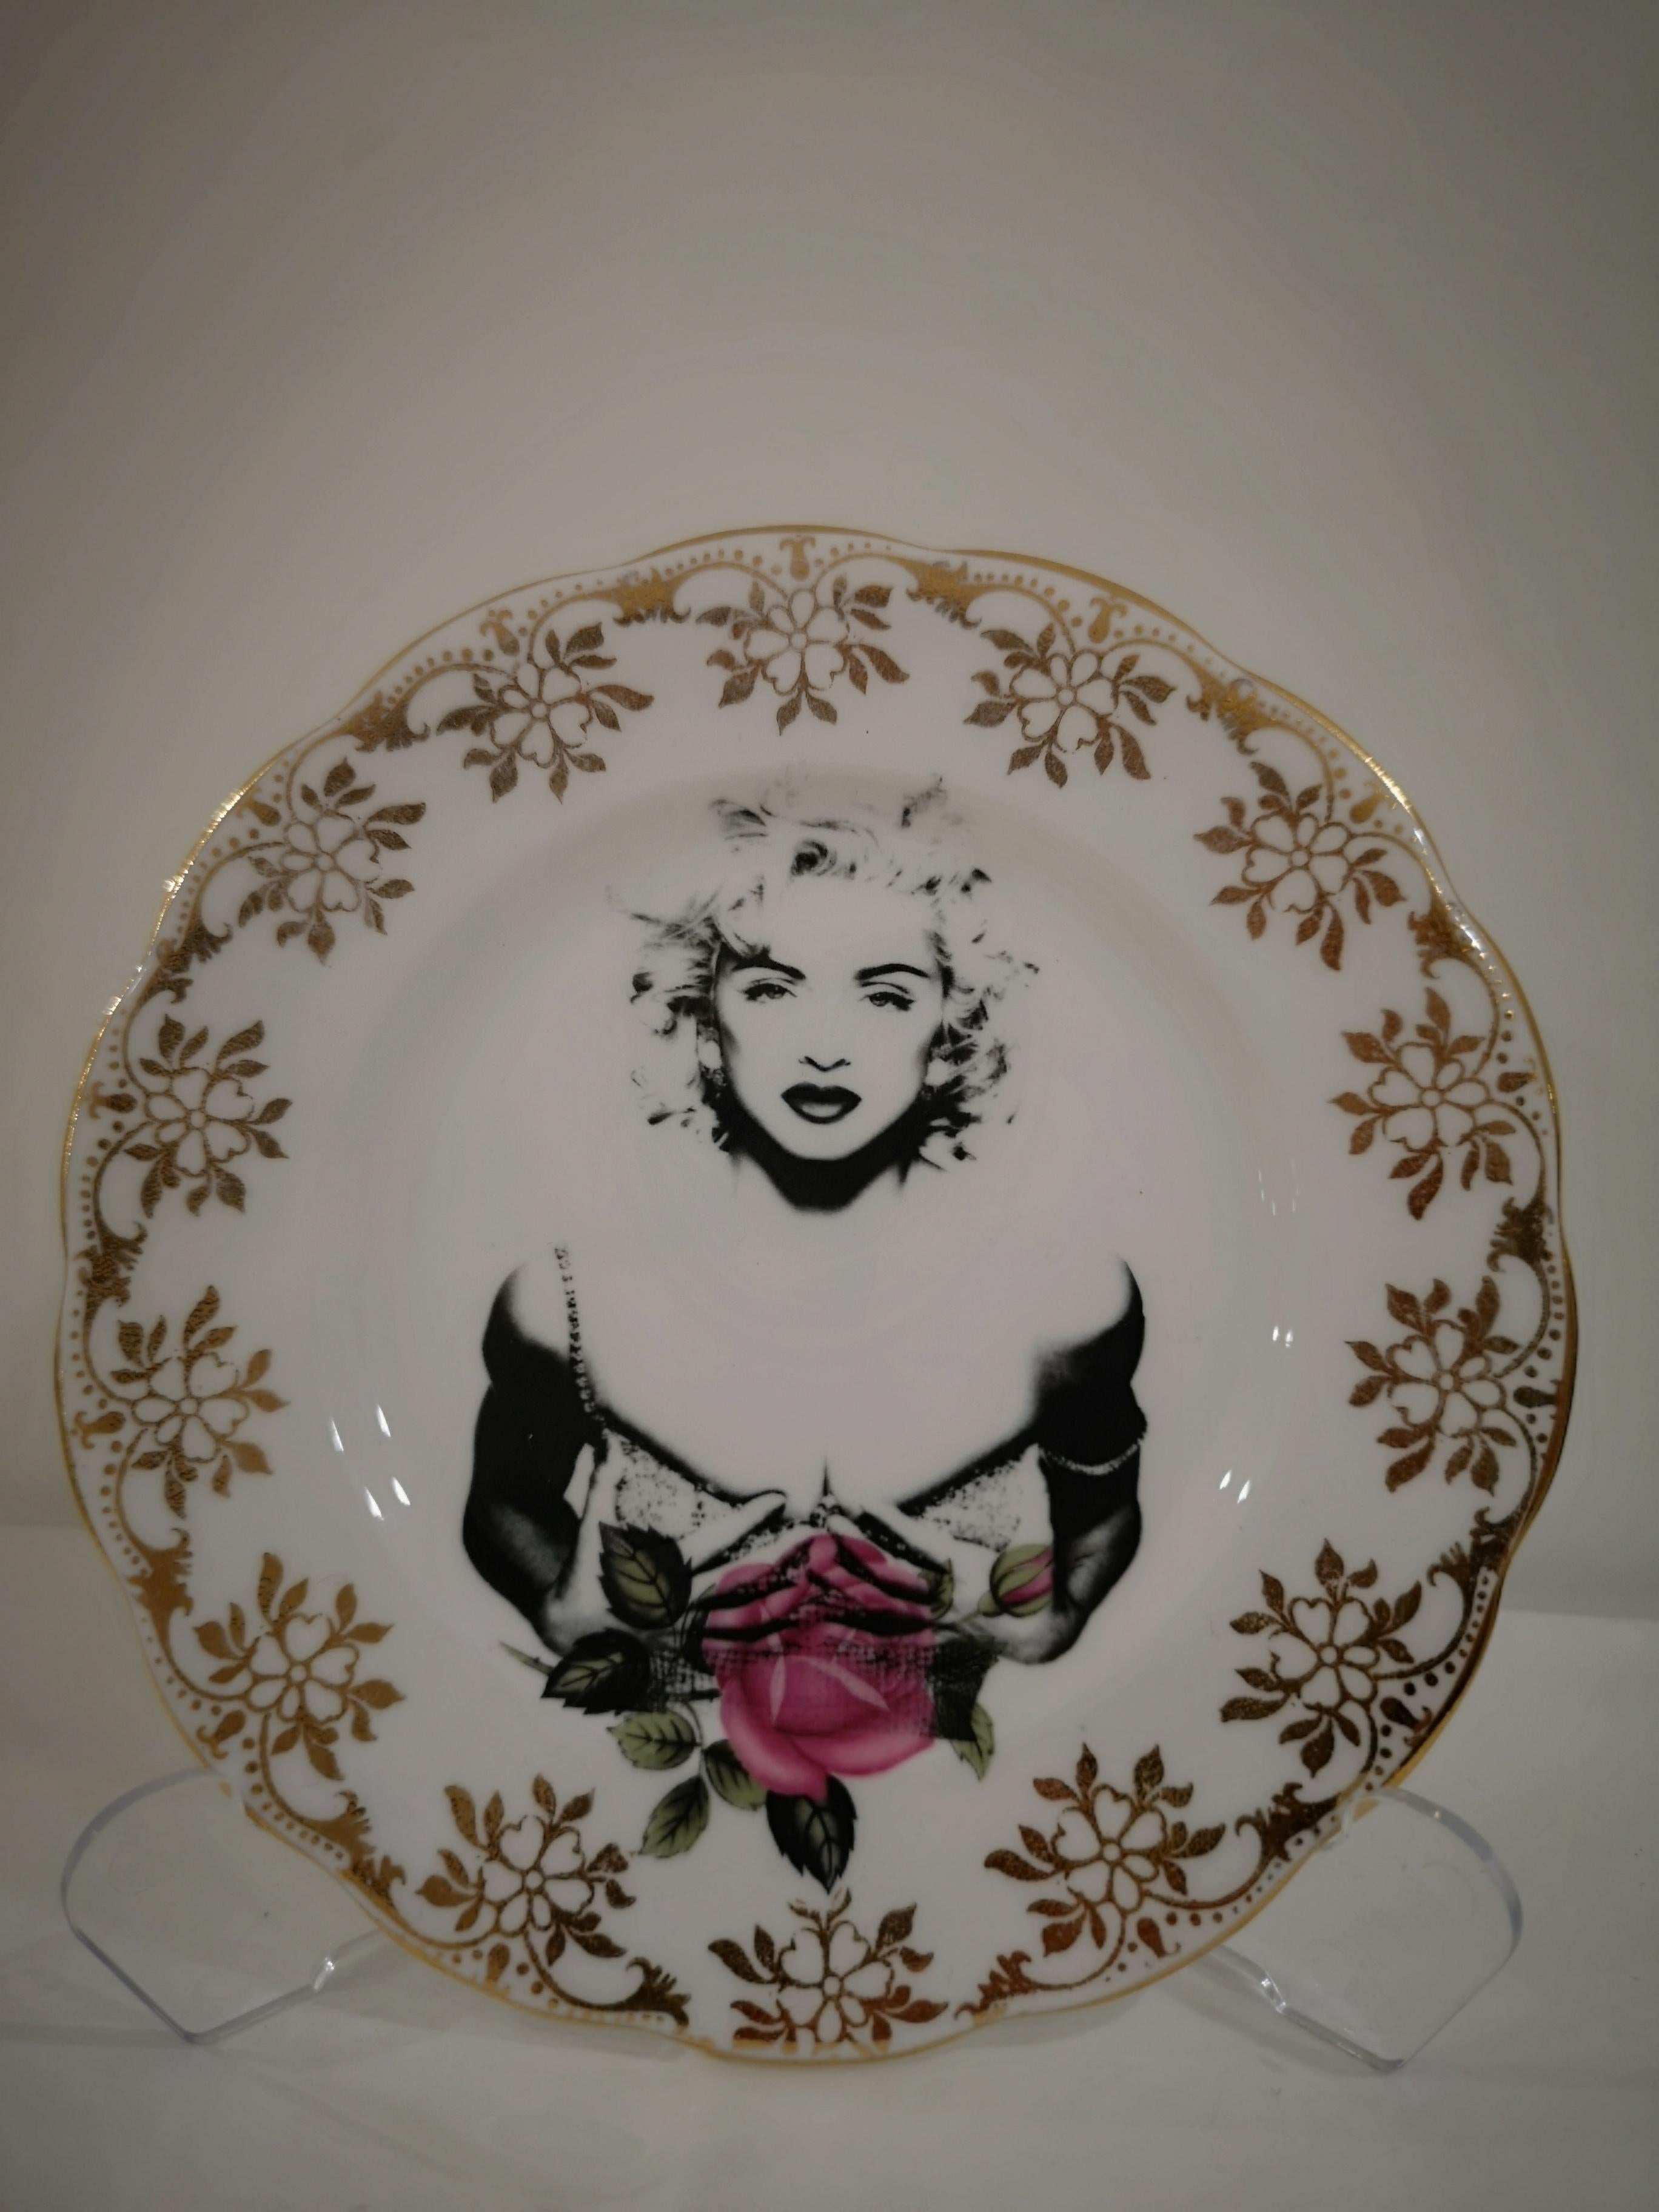 Lovely side plate,decorated by delicate flowers and golden border, Madonna is printed in the center.

You can enjoy it in everyday use but remember to wash it by hand.